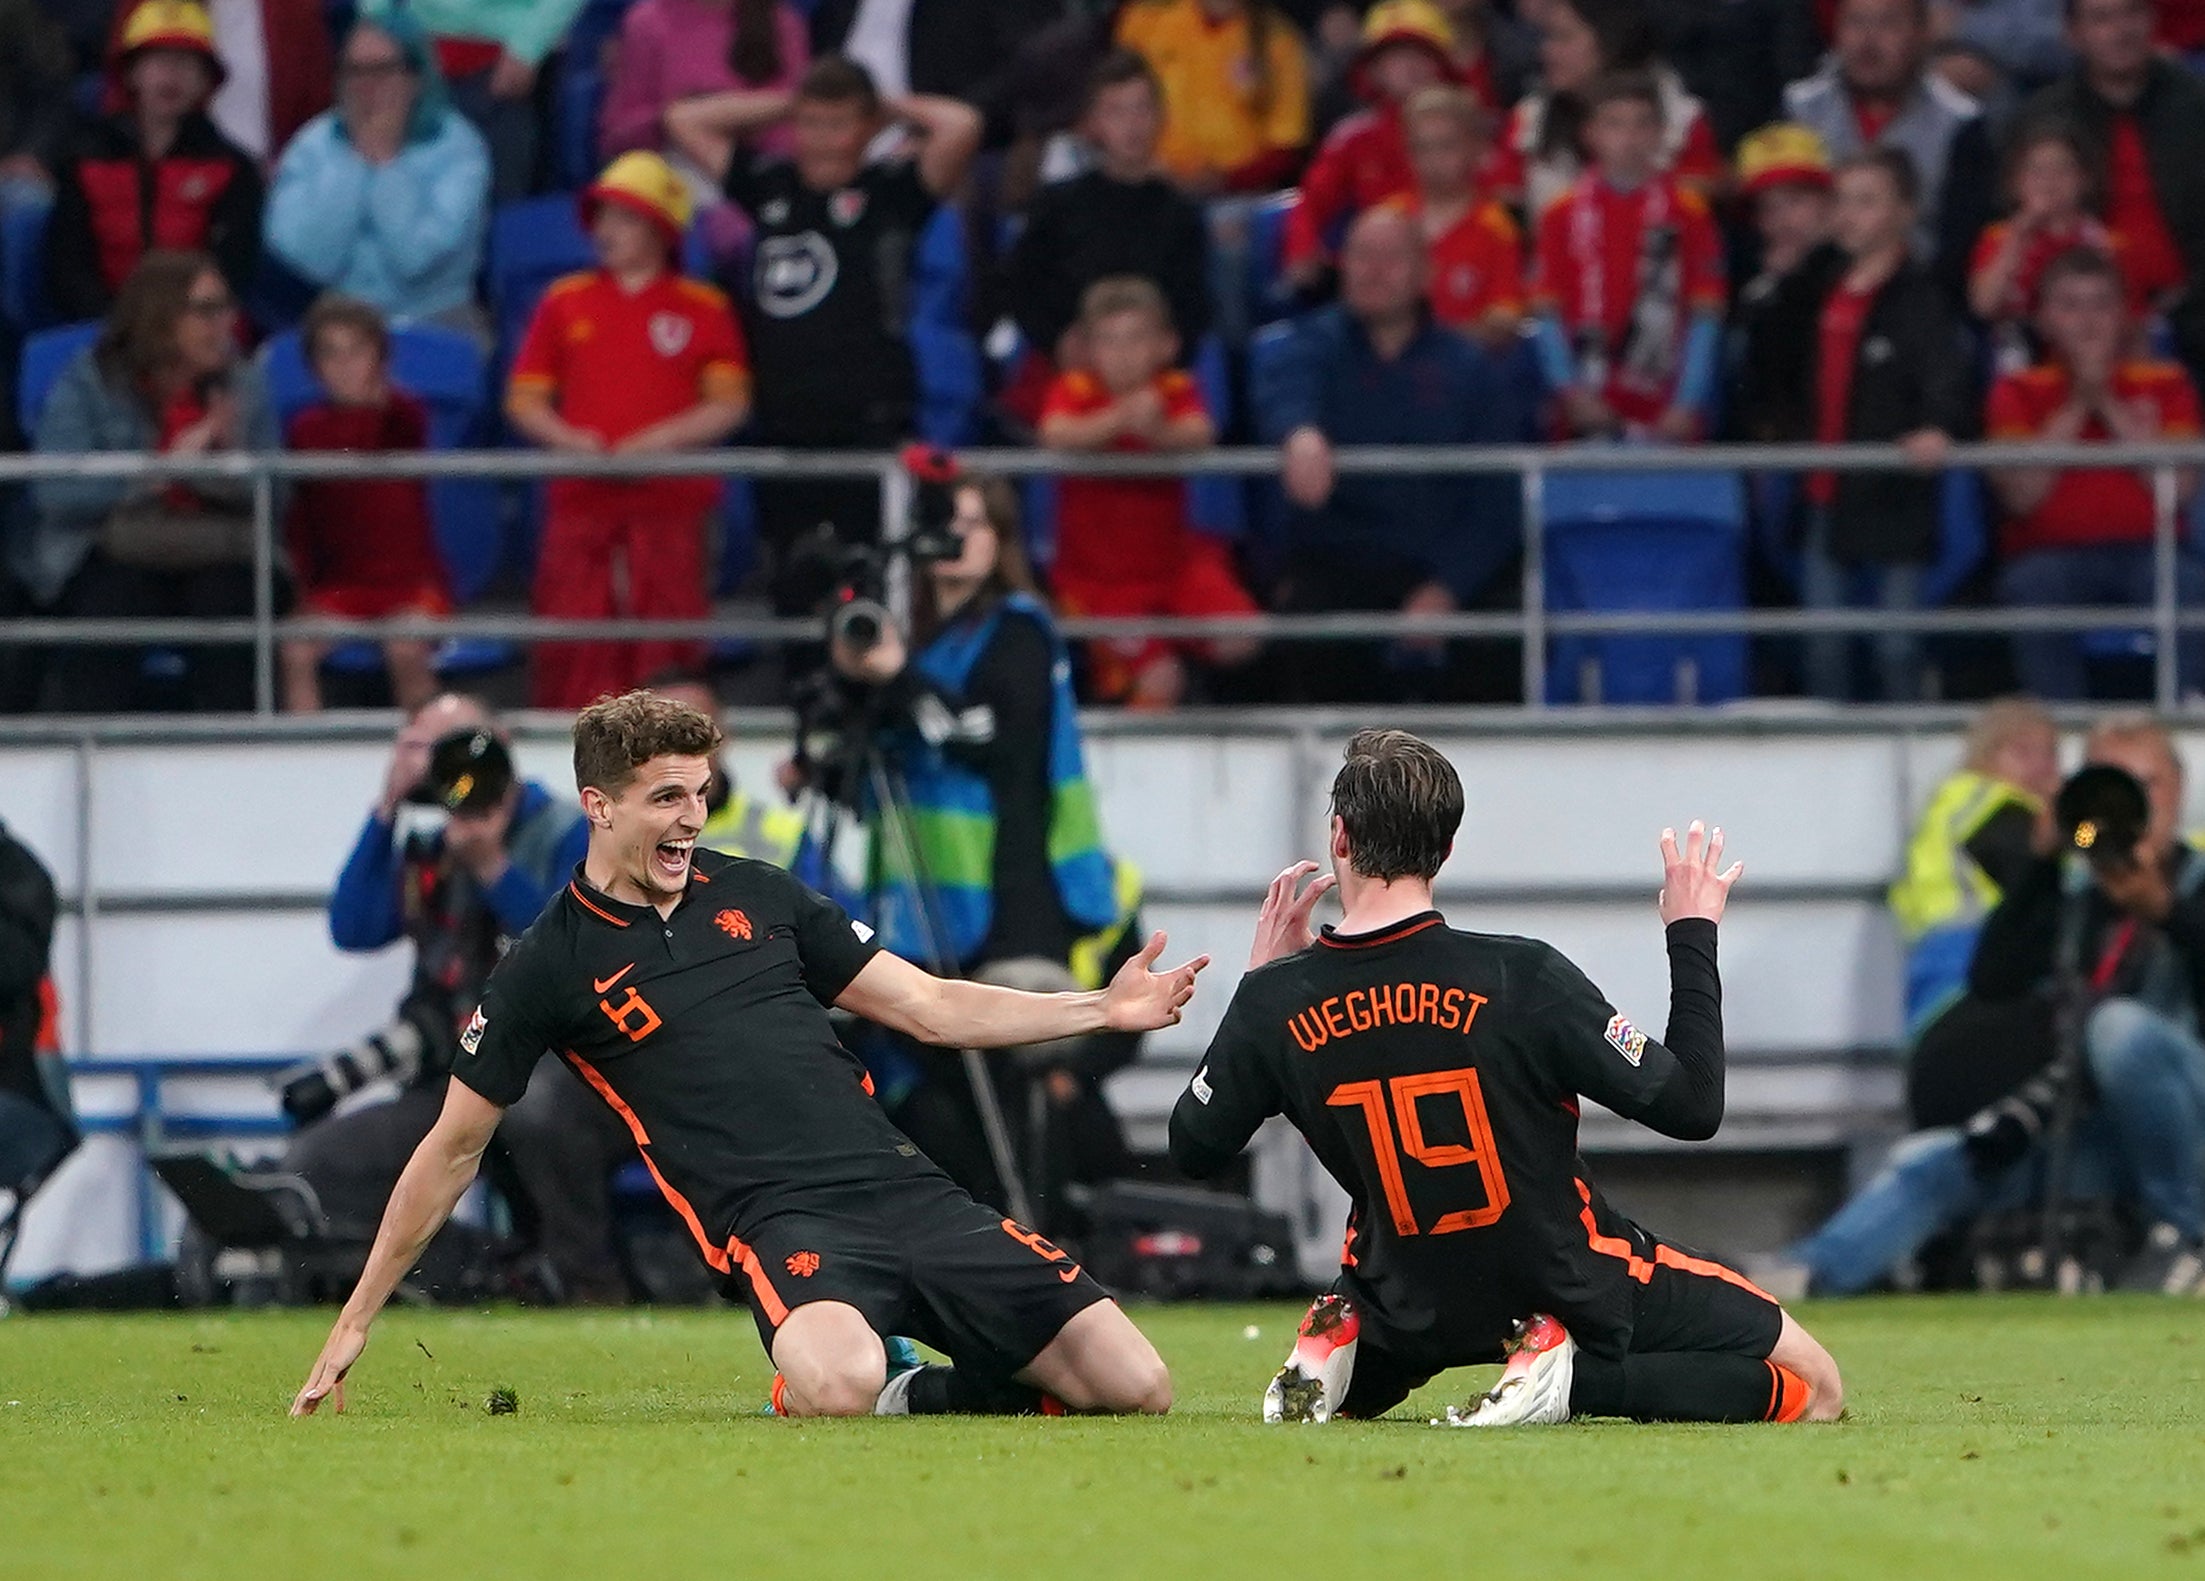 Holland striker Wout Weghorst (right) celebrates with team-mate Guus Til after scoring the Nations League winner against Wales in Cardiff (Zac Goodwin/PA)